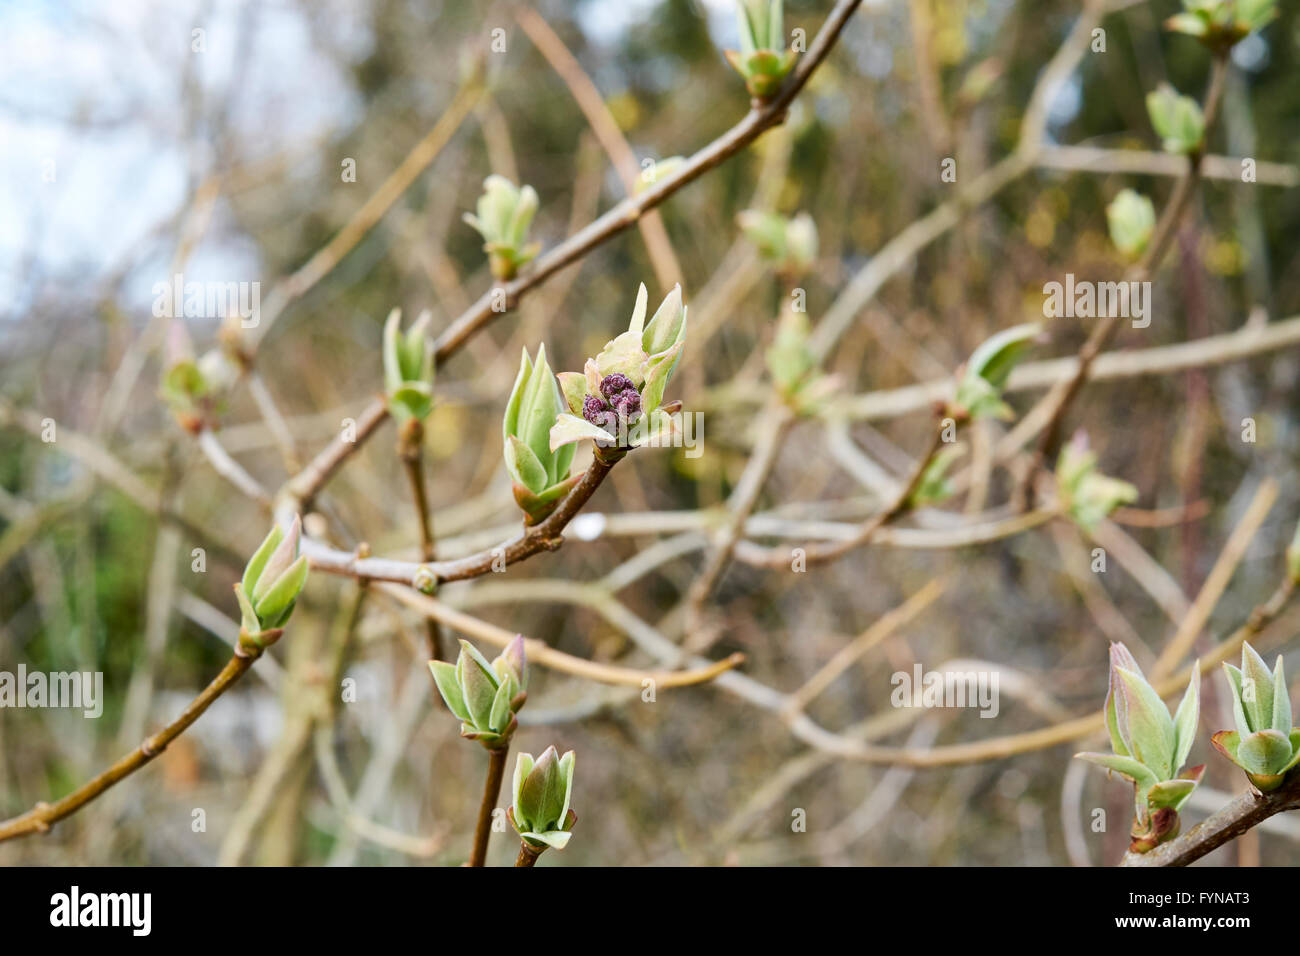 New leaf and flower buds developing on a Lilac (Syringa meyeri) growing in Spring garden flowerbed. UK. Stock Photo